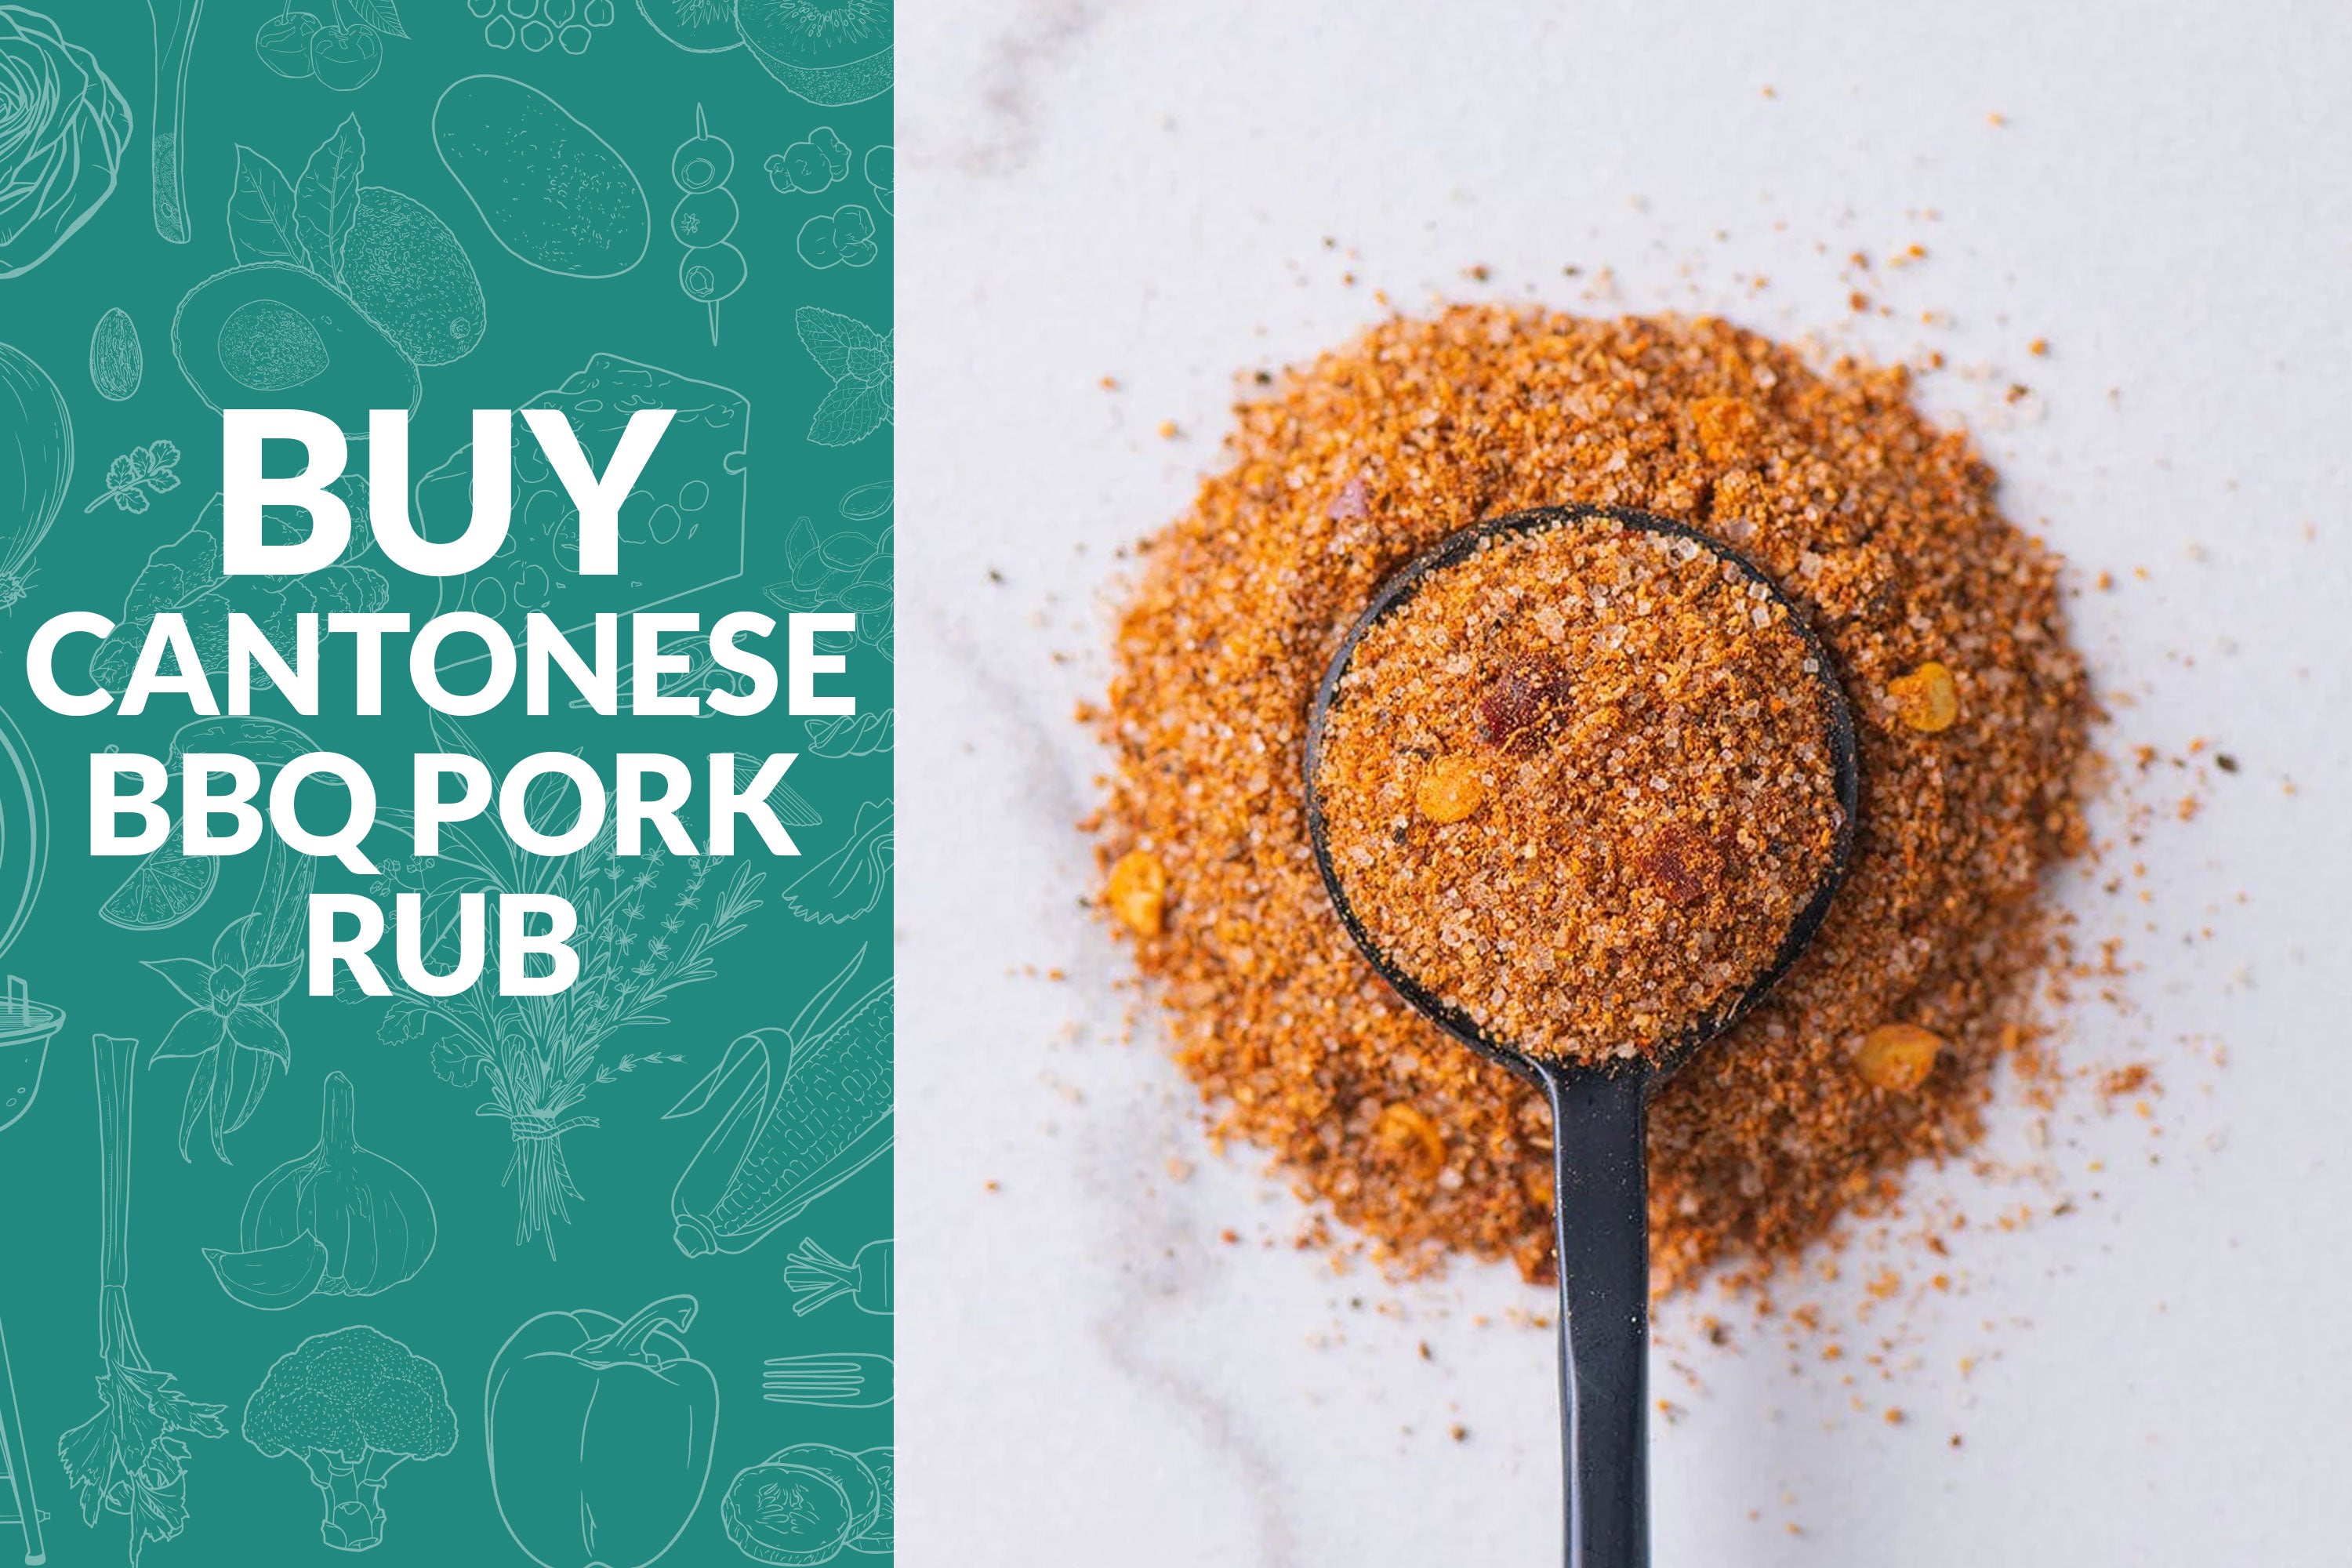 Buy Cantonese BBQ Pork Rub on the left with spoon of seasoning on the right